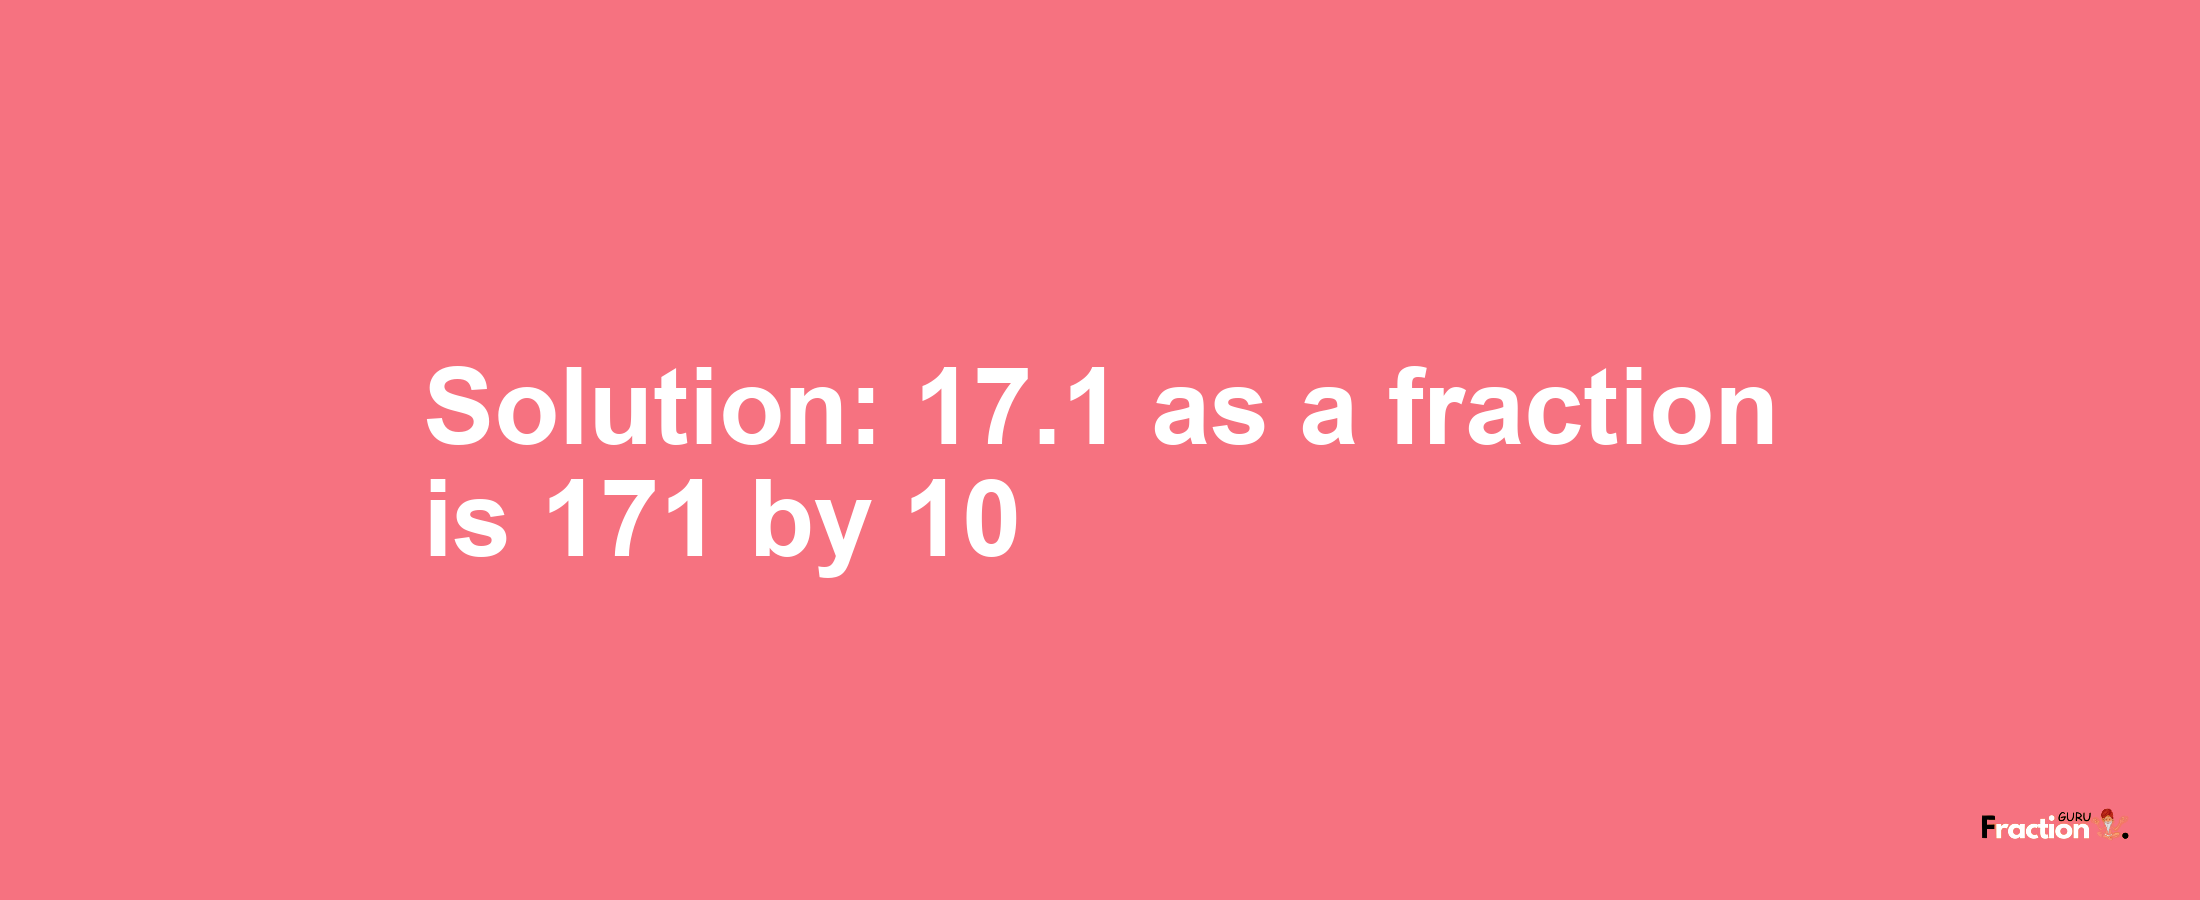 Solution:17.1 as a fraction is 171/10